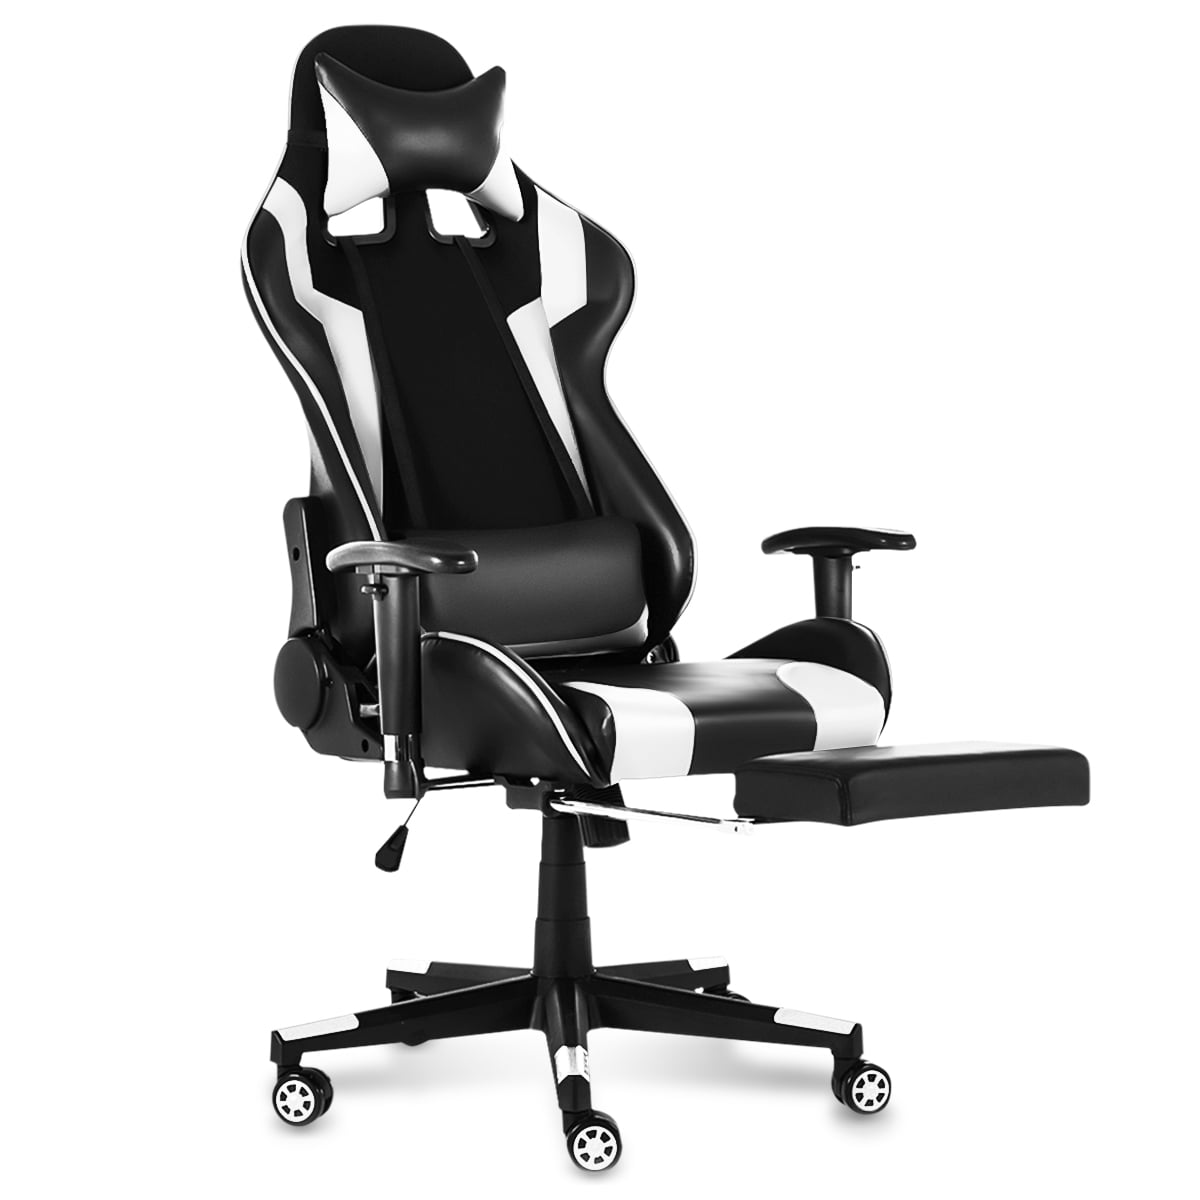 Computer Gaming Chair High-back Chairs Executive Swivel Racing Office w/Footrest 